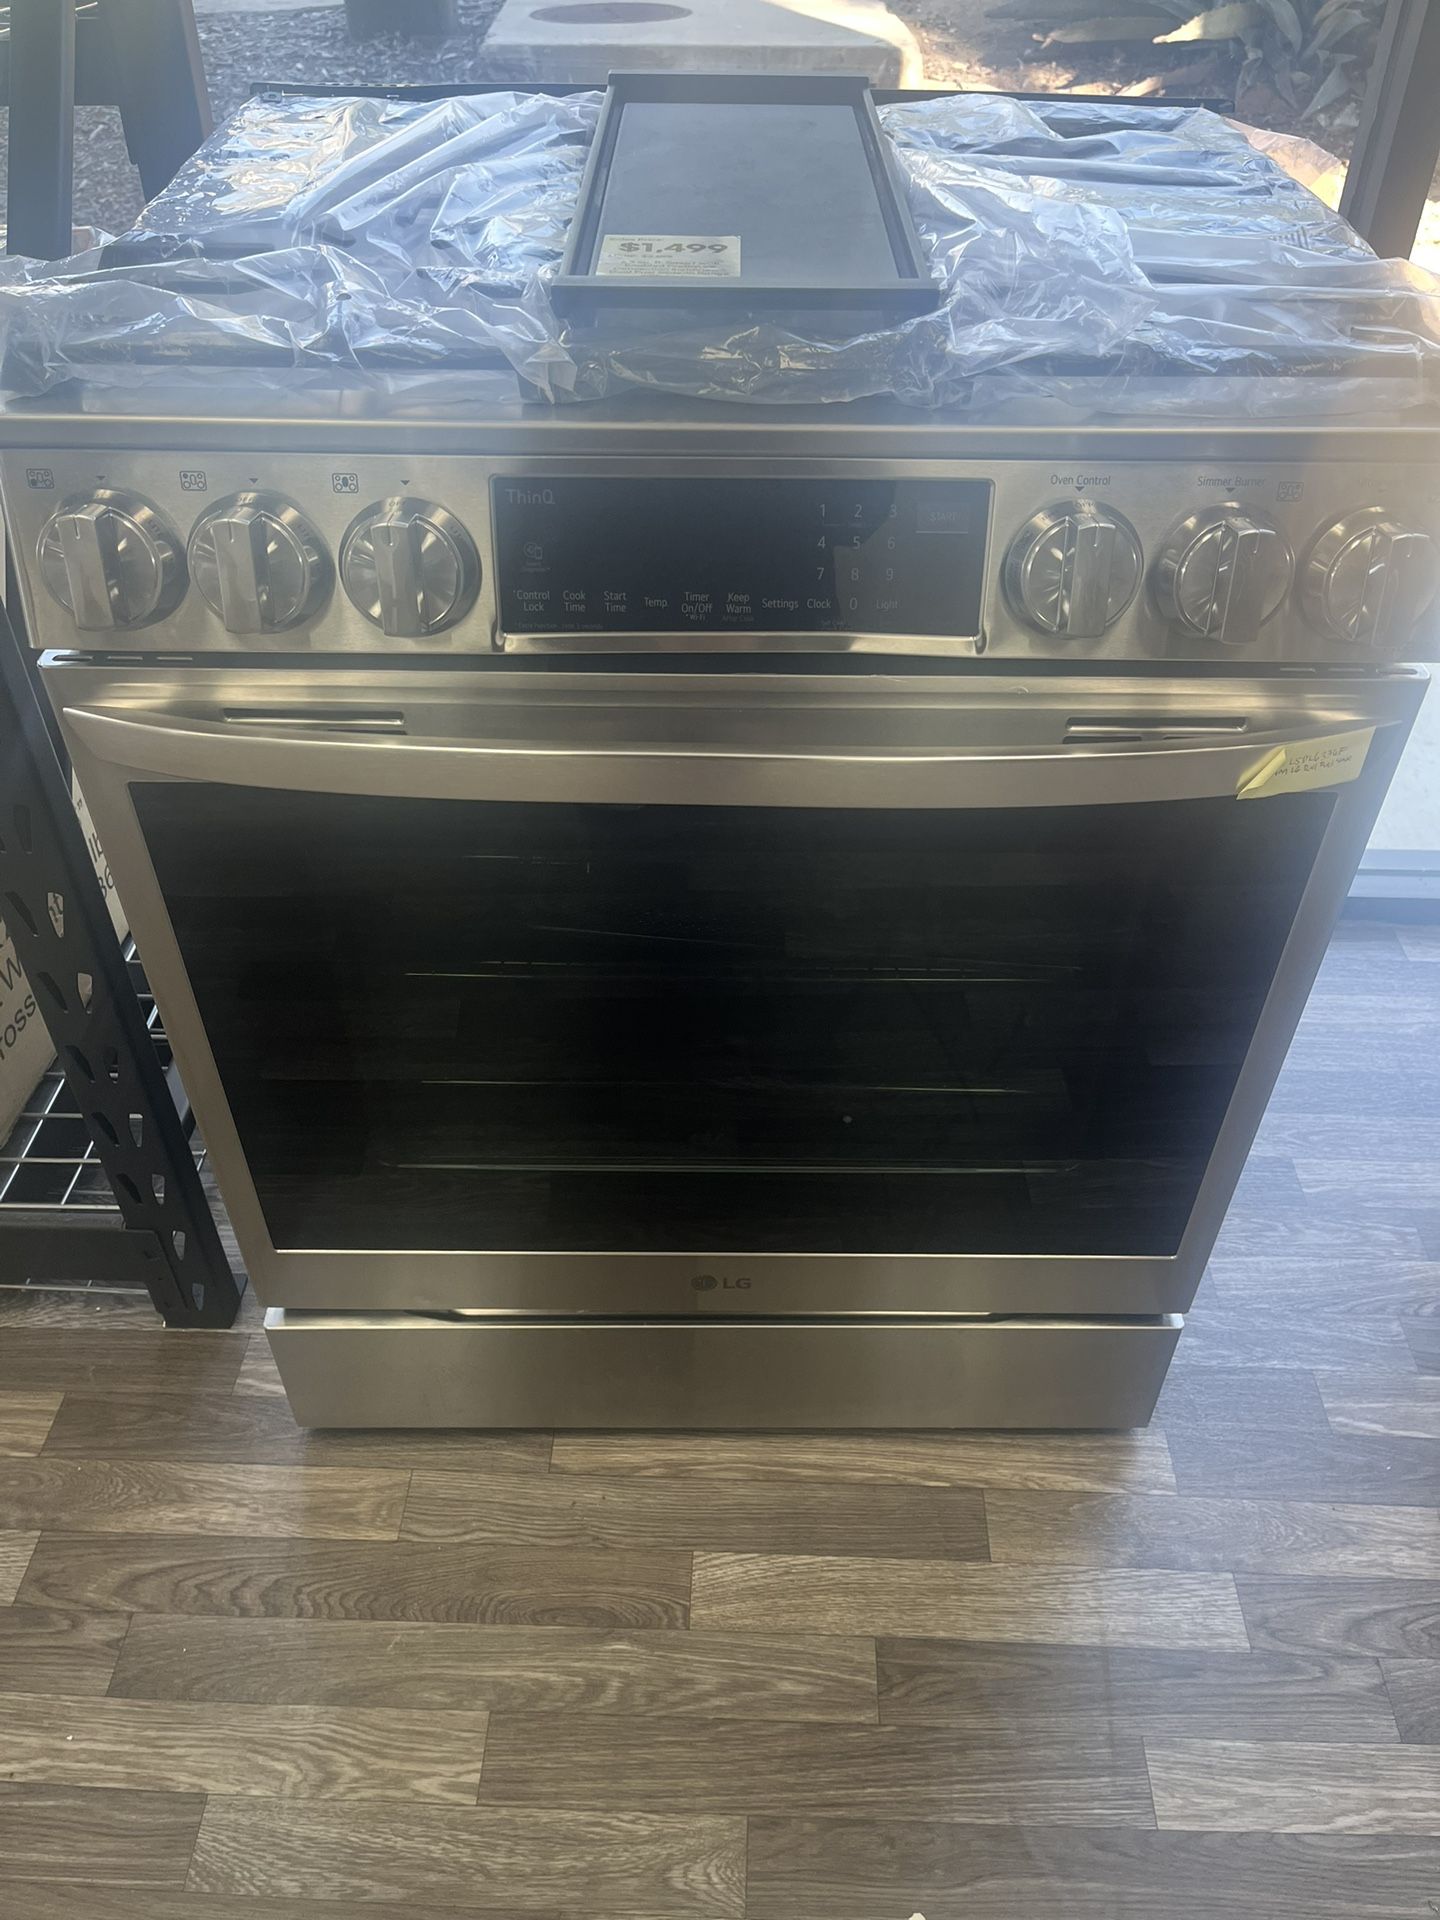 Stainless Steel Slide In Dual Fuel Range With Air Fry Was$2699 Now$1499